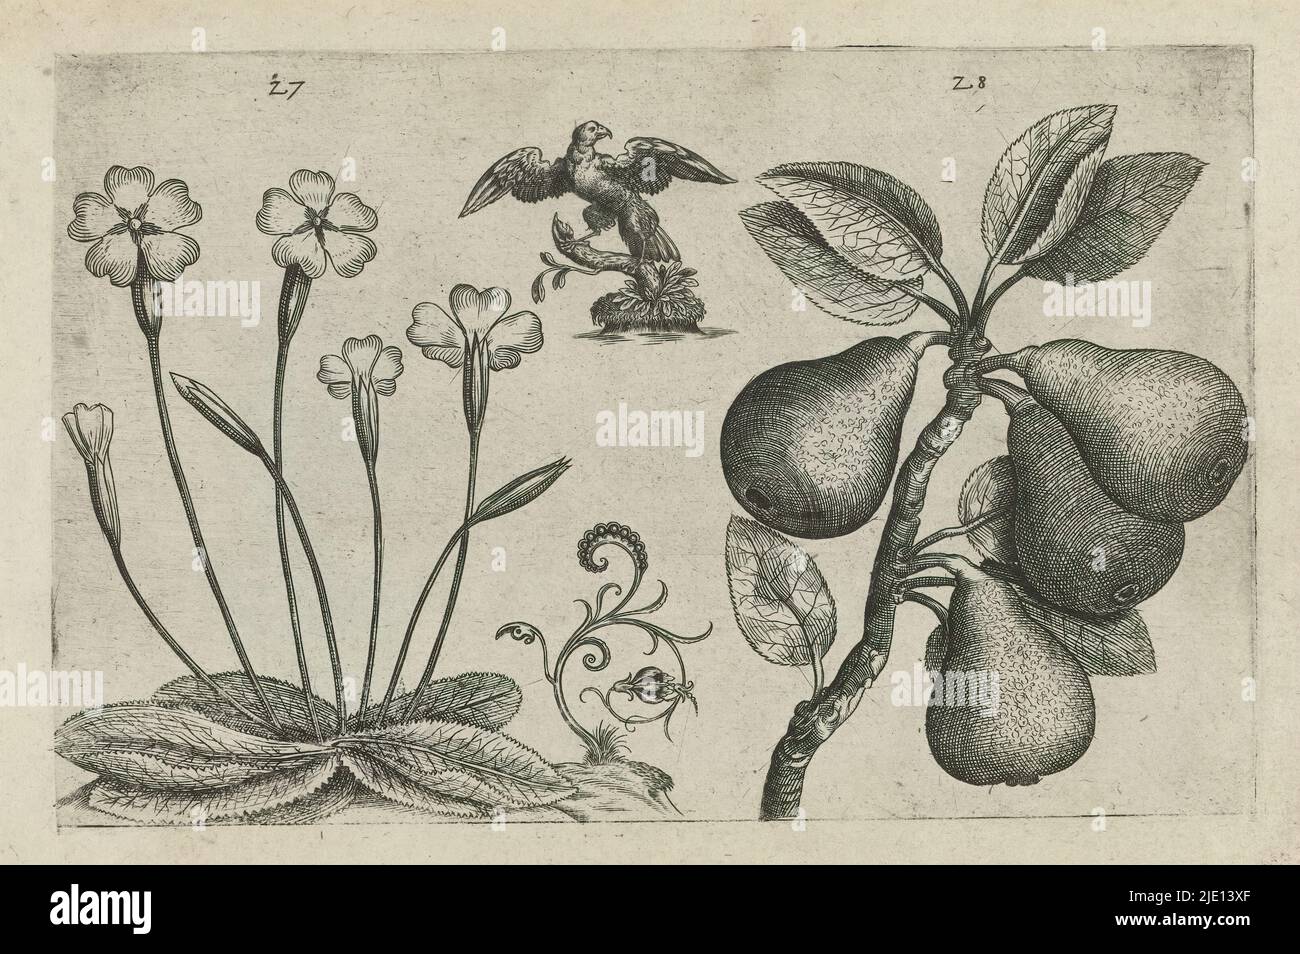 Dandelion and pear, Cognoscite lilia (series title), Dandelion (Primula veris) and pear (Pyrus communis), numbered 27 and 28. Between them an eagle., print maker: Crispijn van de Passe (I), (attributed to), after drawing by: Crispijn van de Passe (I), (attributed to), publisher: Crispijn van de Passe (I), print maker: Cologne, after drawing by: Cologne, publisher: Cologne, publisher: London, 1600 - 1604, paper, engraving, height 127 mm × width 205 mm, height 172 mm × width 272 mm Stock Photo